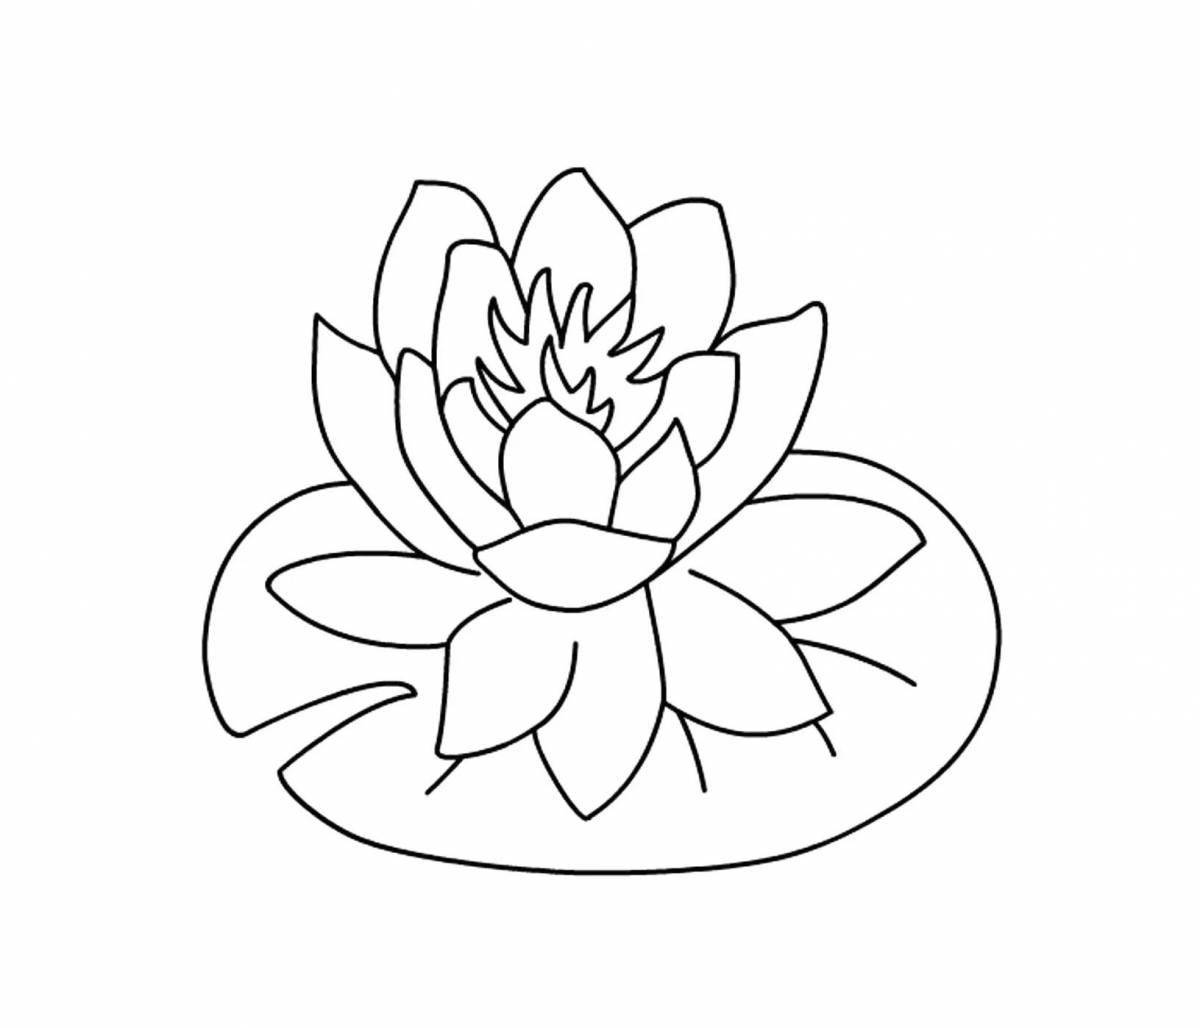 White water lily #1